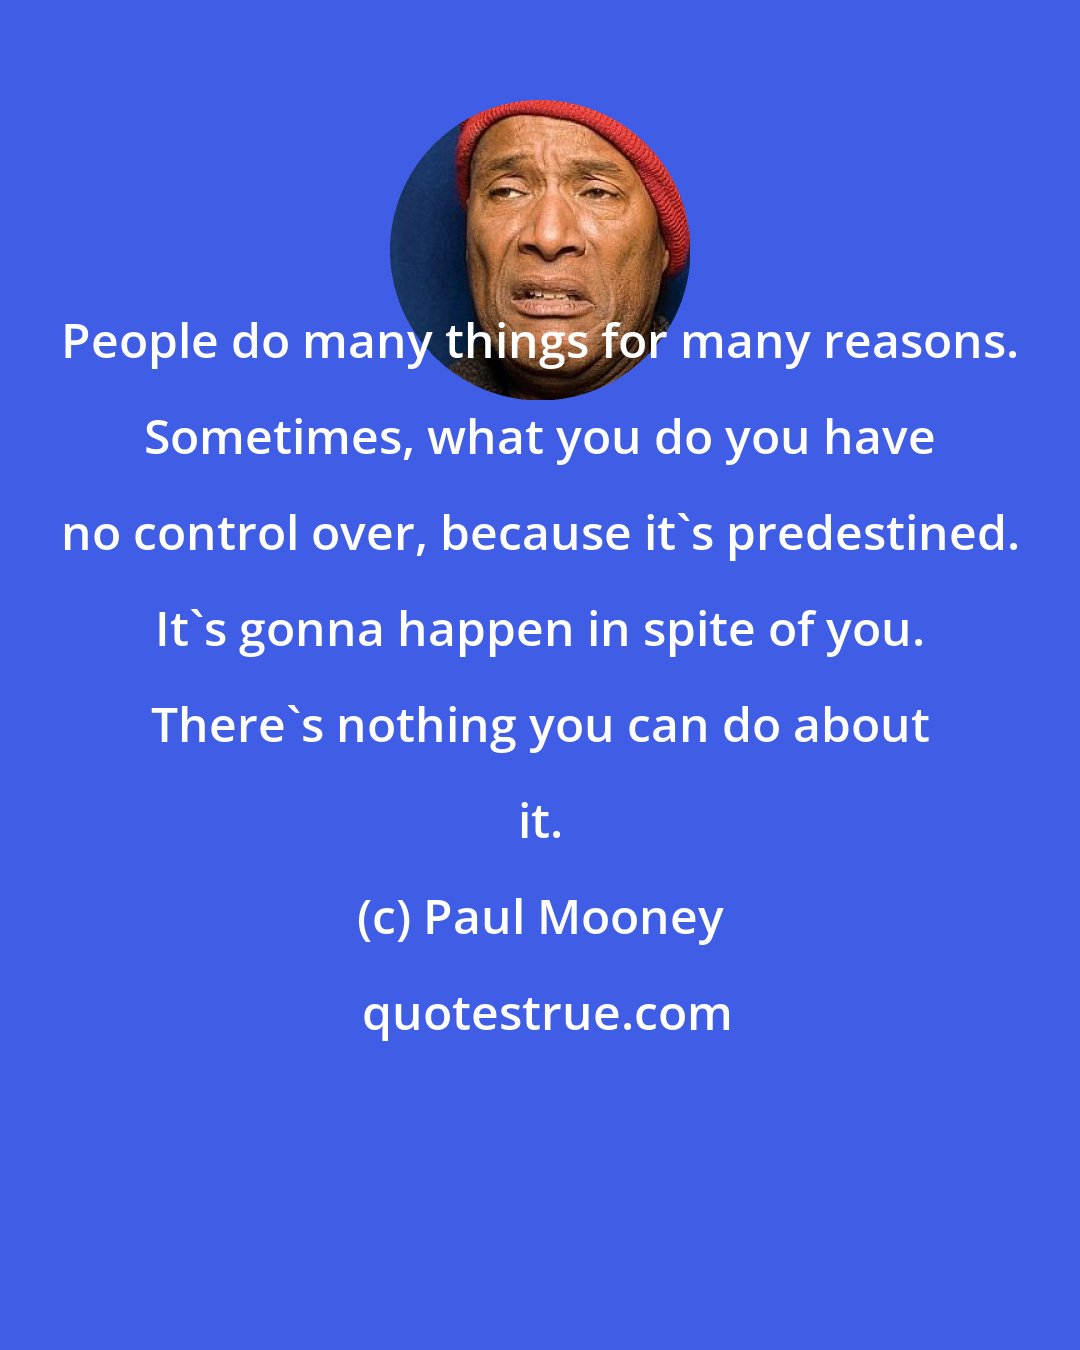 Paul Mooney: People do many things for many reasons. Sometimes, what you do you have no control over, because it's predestined. It's gonna happen in spite of you. There's nothing you can do about it.